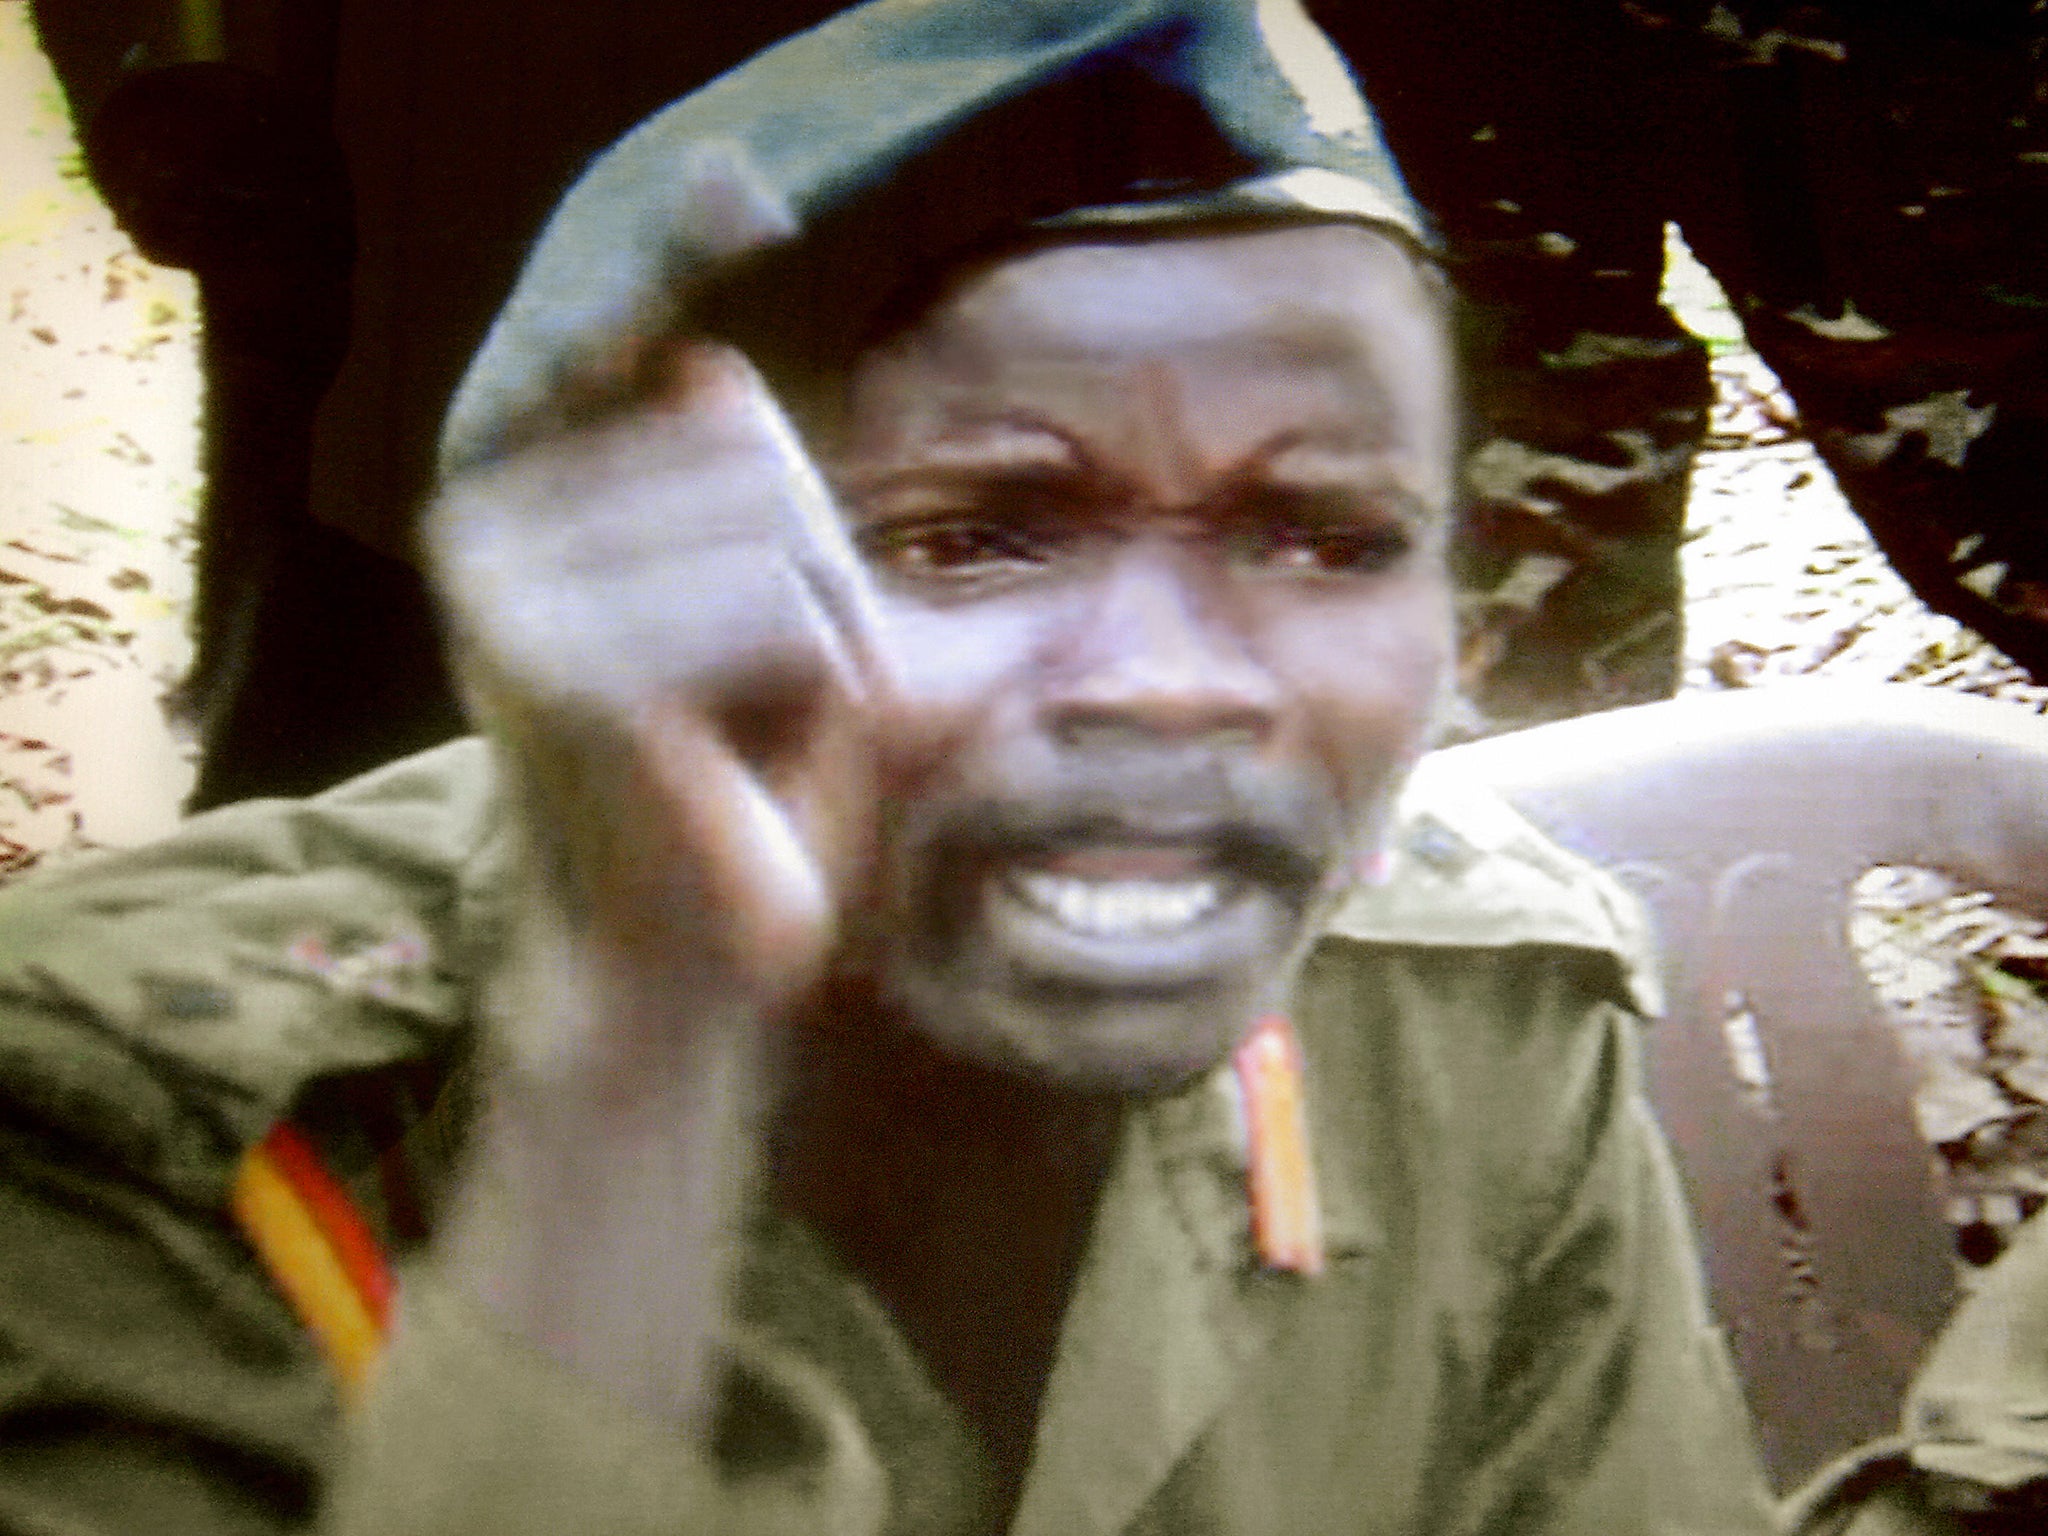 Joseph Kony has been Africa’s most notorious warlord for three decades, but now it appears he may never be brought to justice